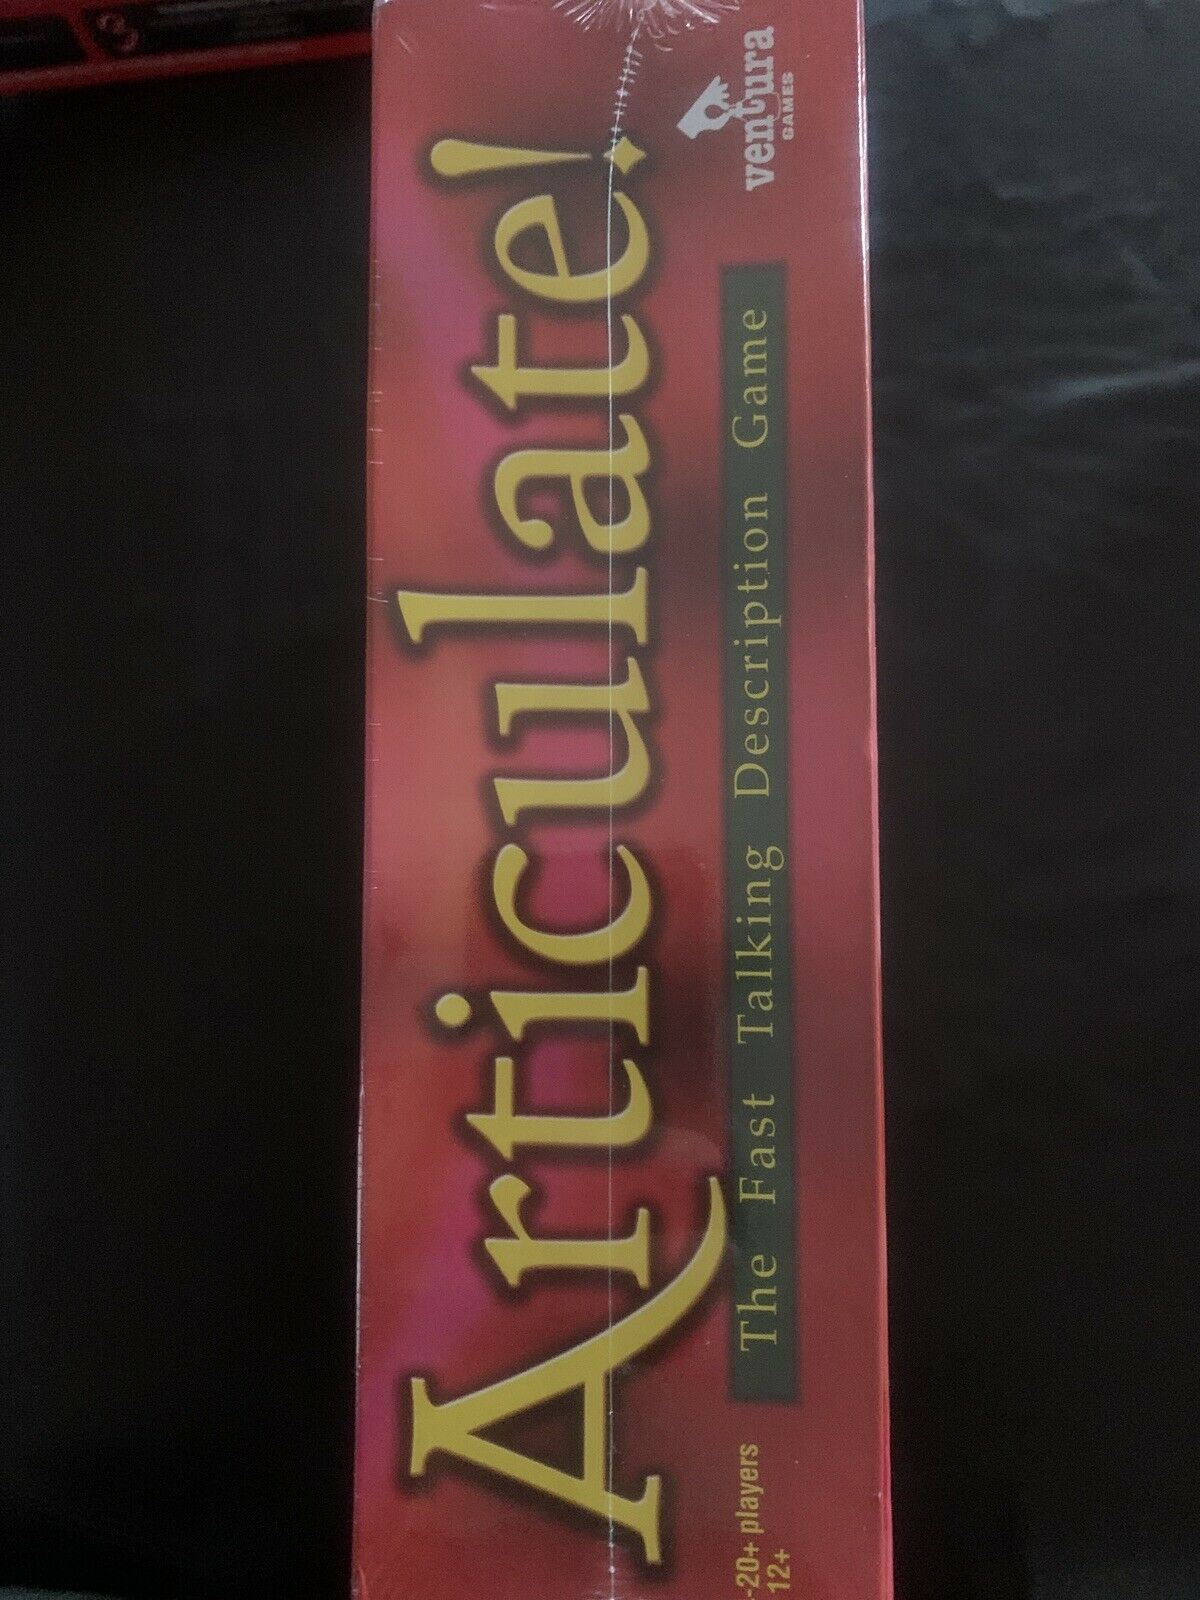 *New Sealed* Articulate - The Fast Talking Description Game